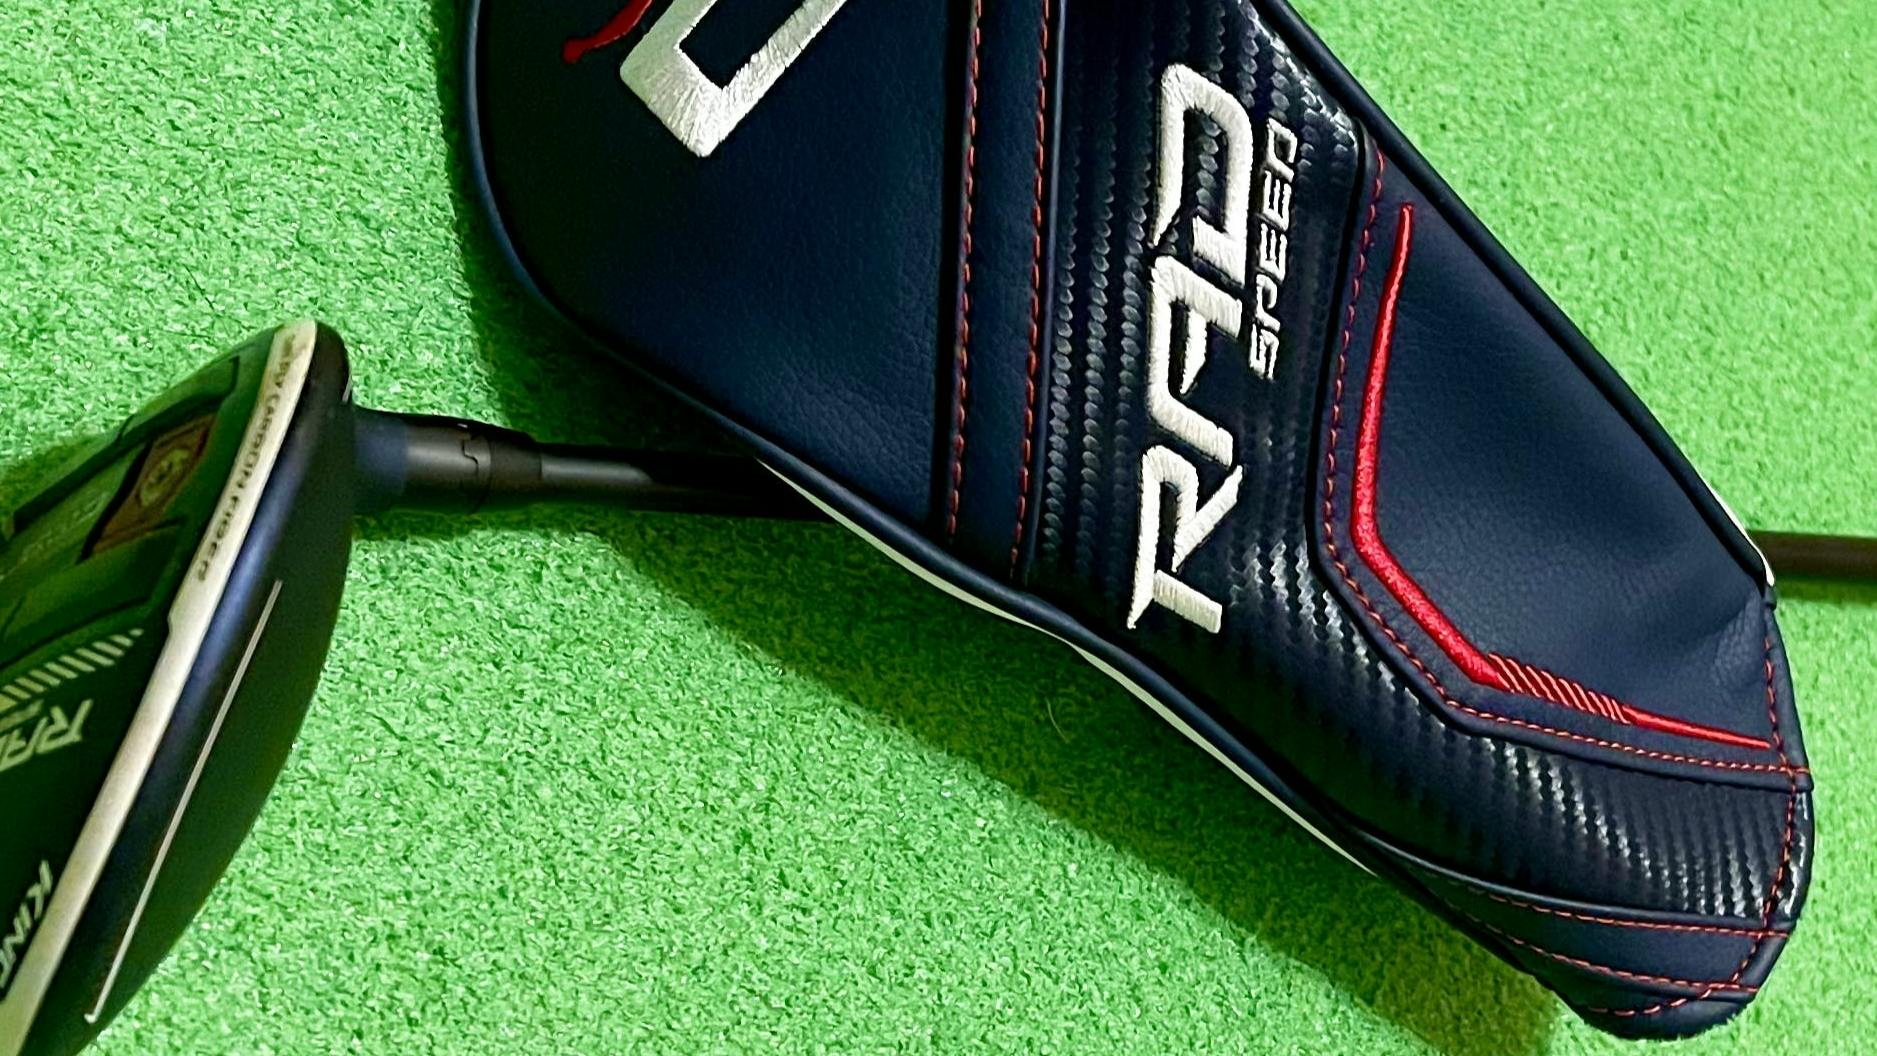 RadSpeed fairway wood and head cover lying on a turf.